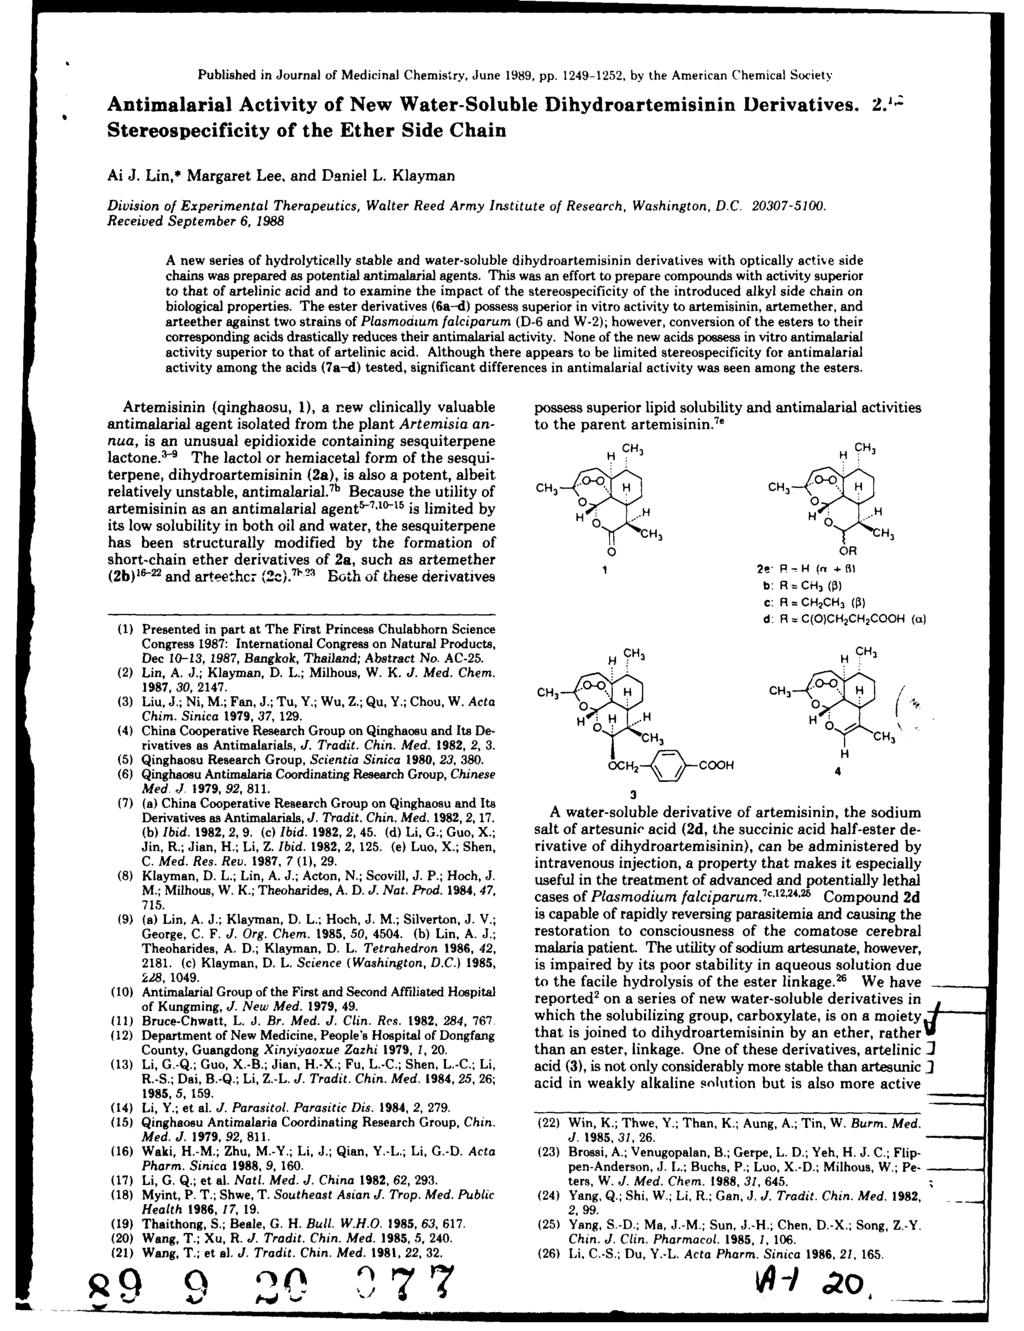 Published in Journal of Medicinal Chemistry, June 1989, pp. 1249-1252. by the American Chemical Society Antimalarial Activity of New Water-Soluble Dihydroartemisinin Derivatives. 2.